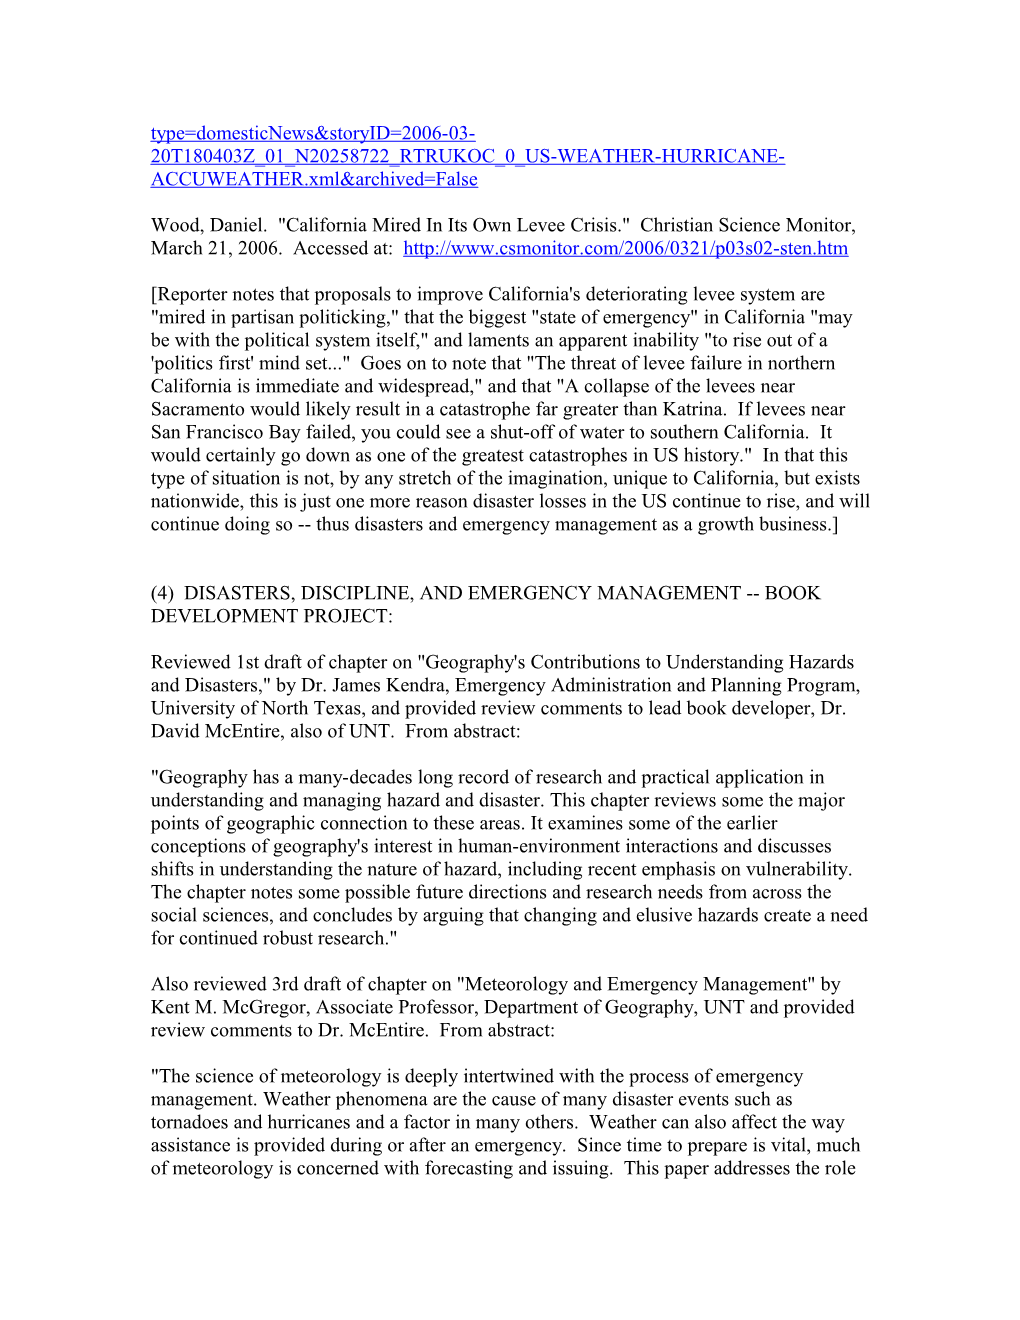 March 21, 2006 FEMA Emergency Management Higher Education Project Activity Report